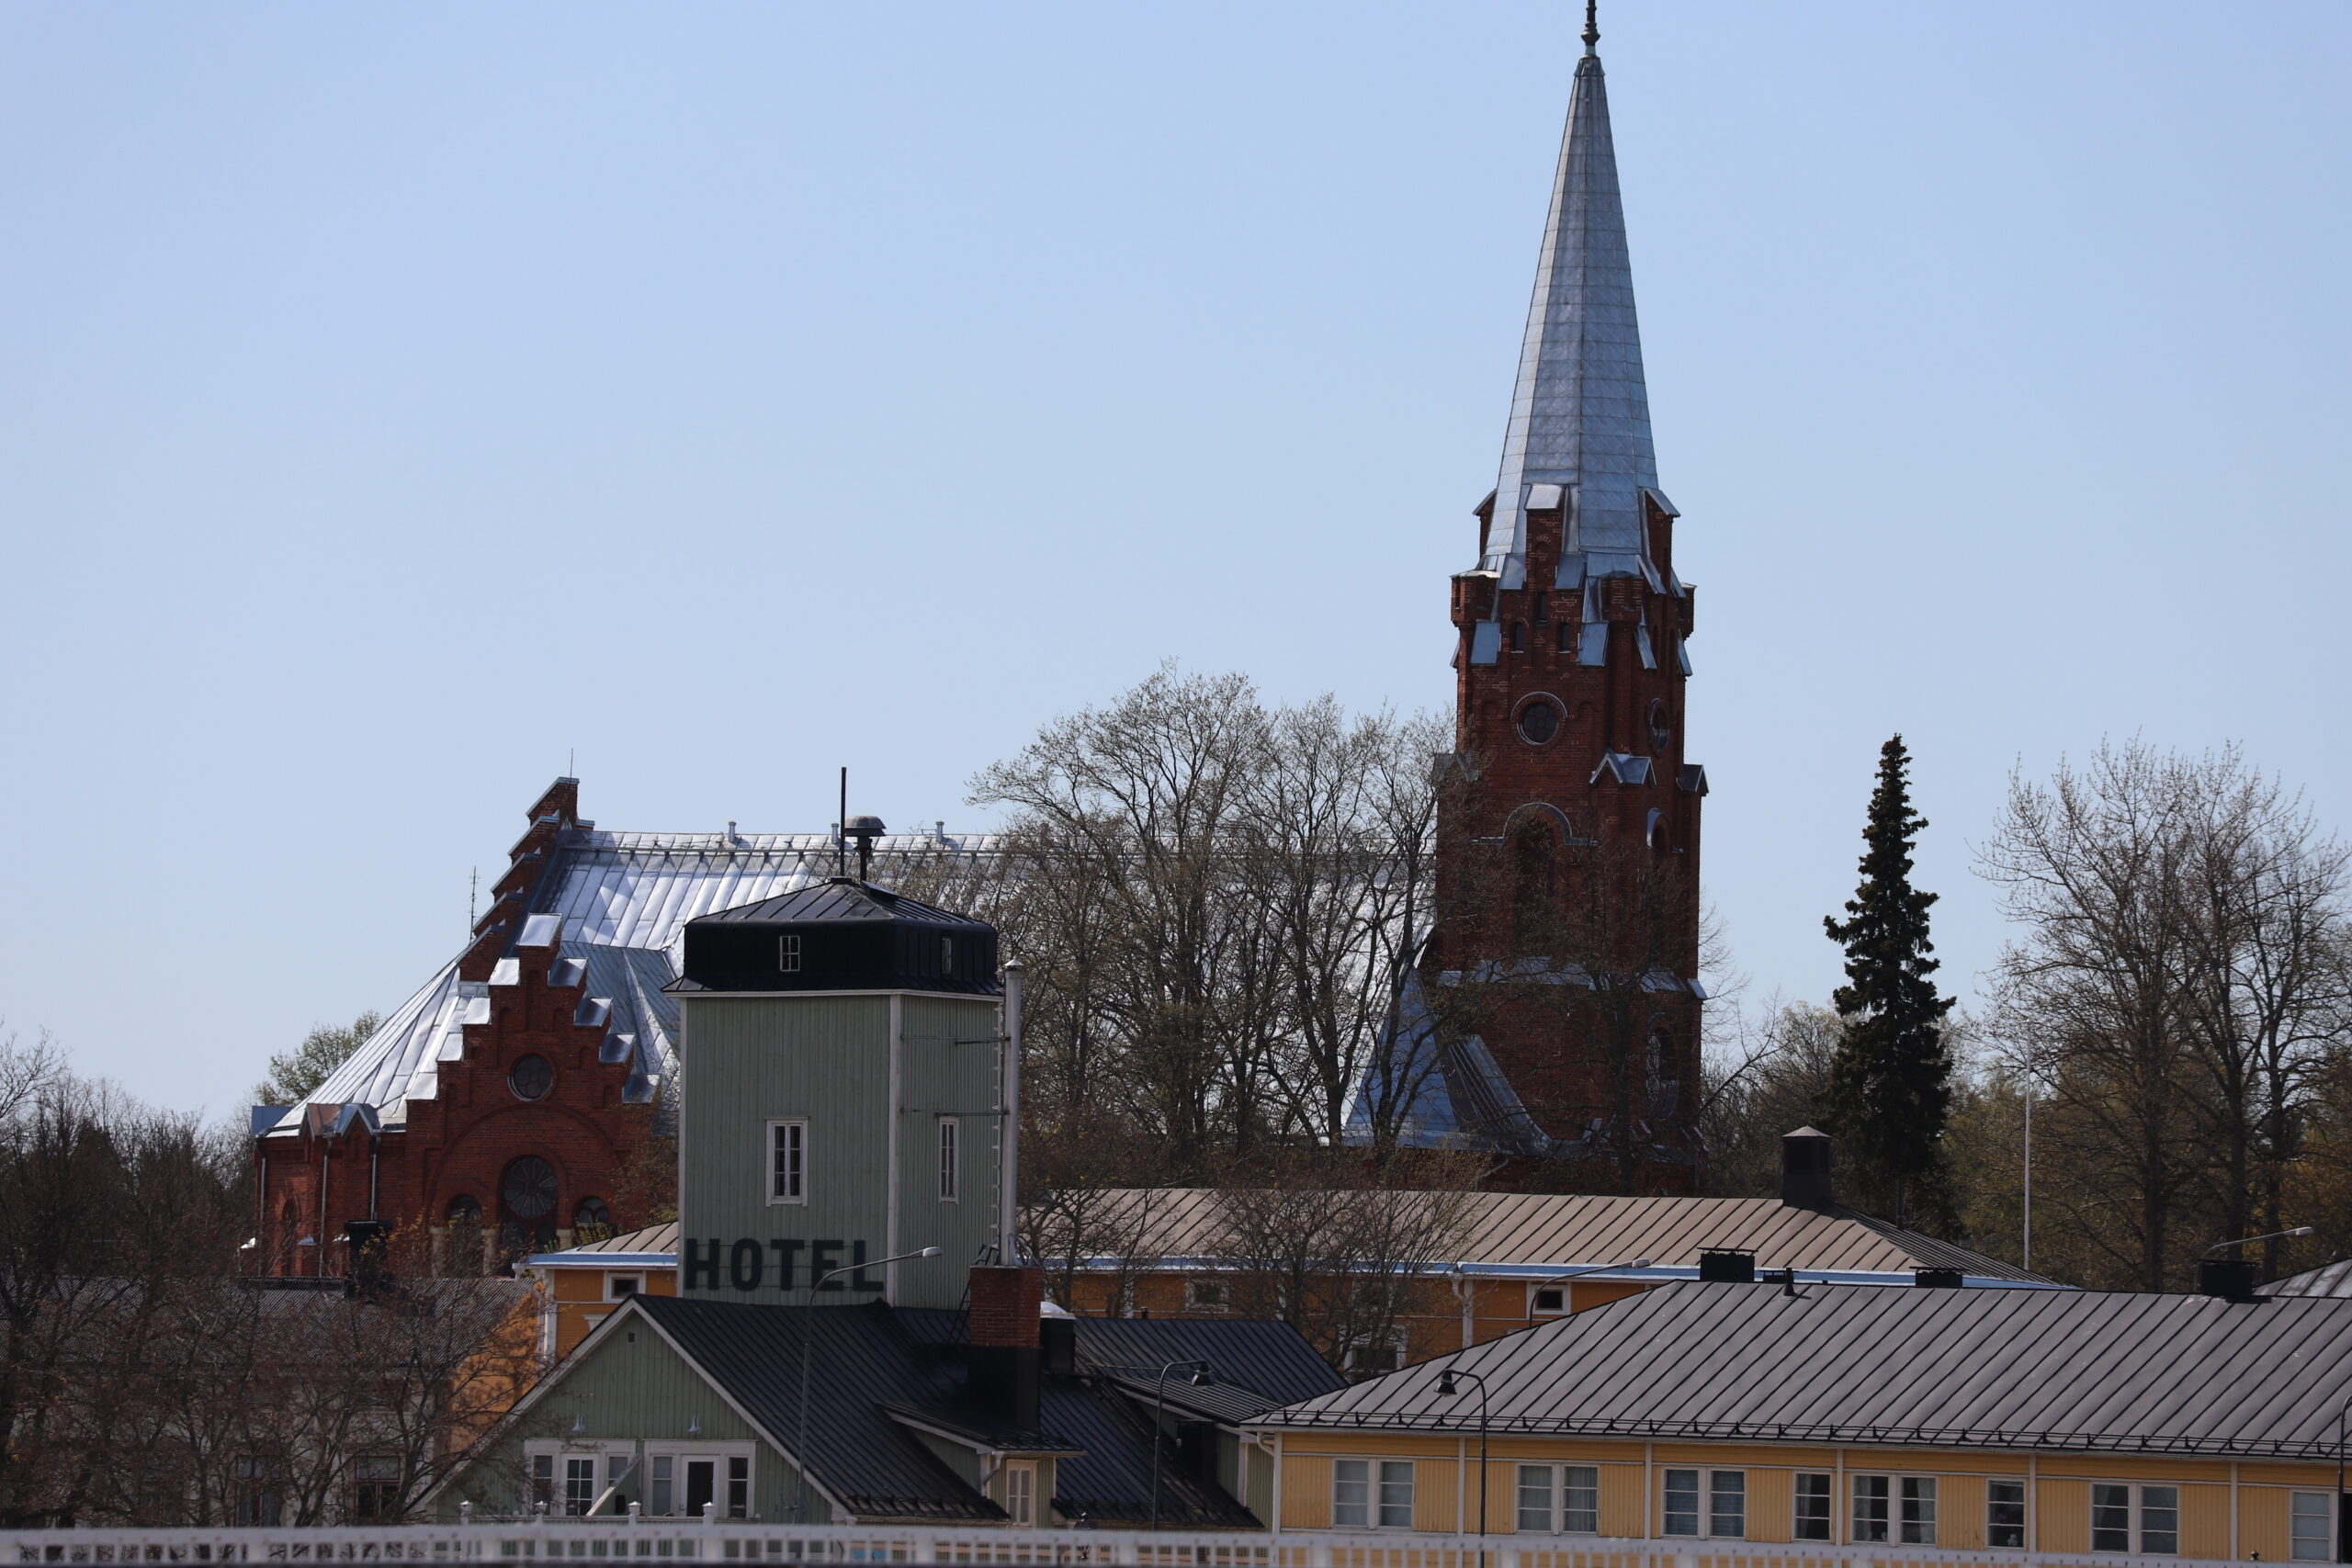 City view with a church tower.